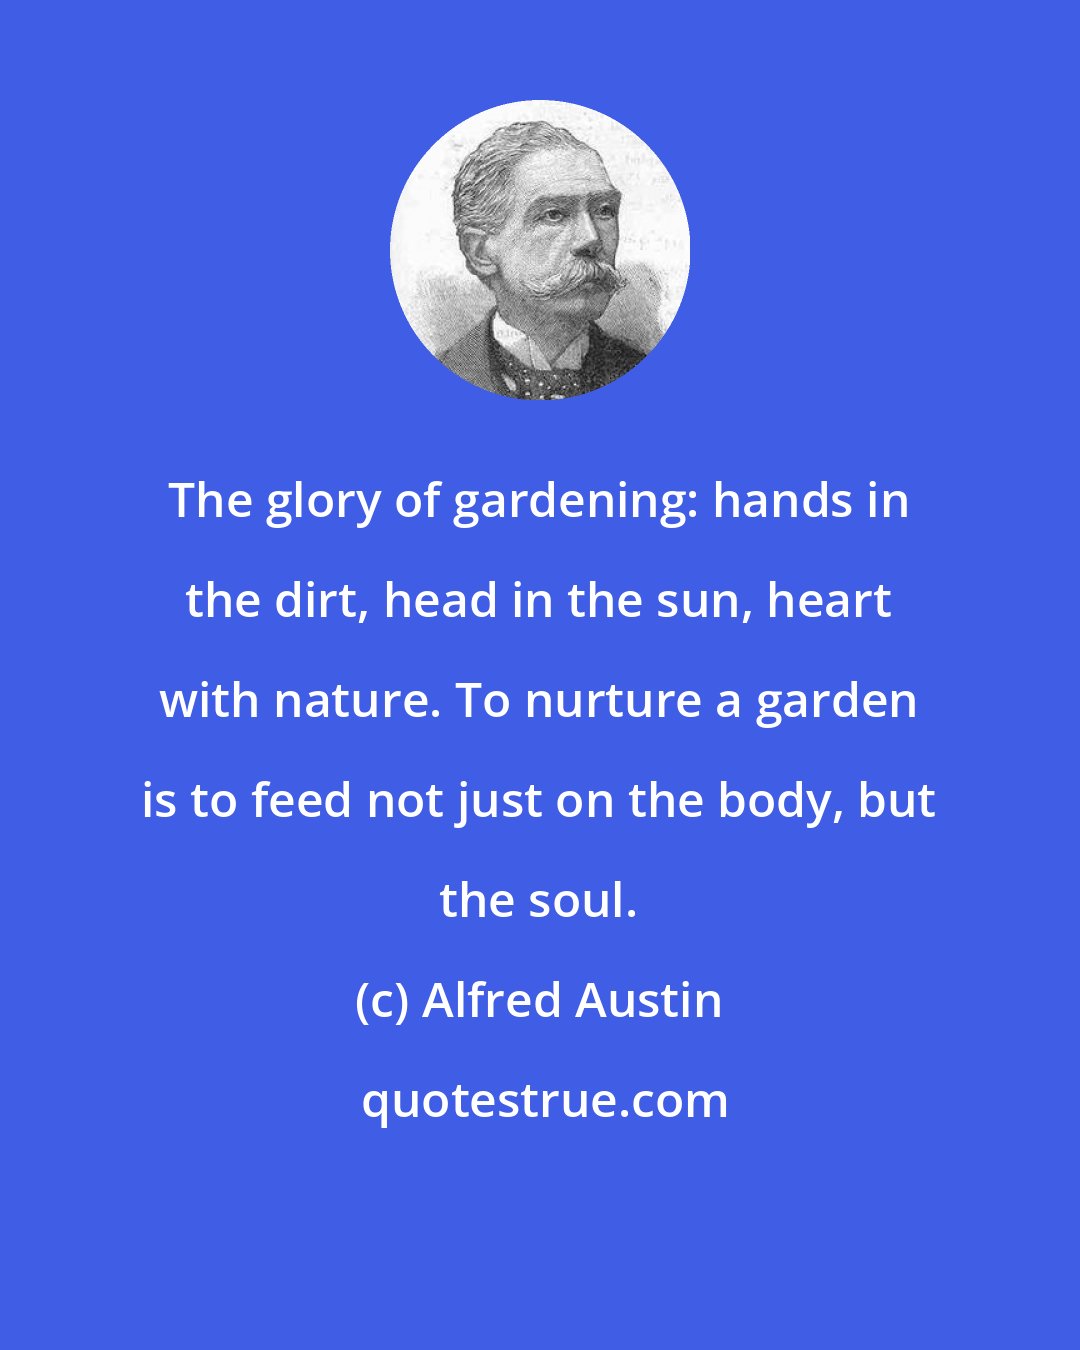 Alfred Austin: The glory of gardening: hands in the dirt, head in the sun, heart with nature. To nurture a garden is to feed not just on the body, but the soul.